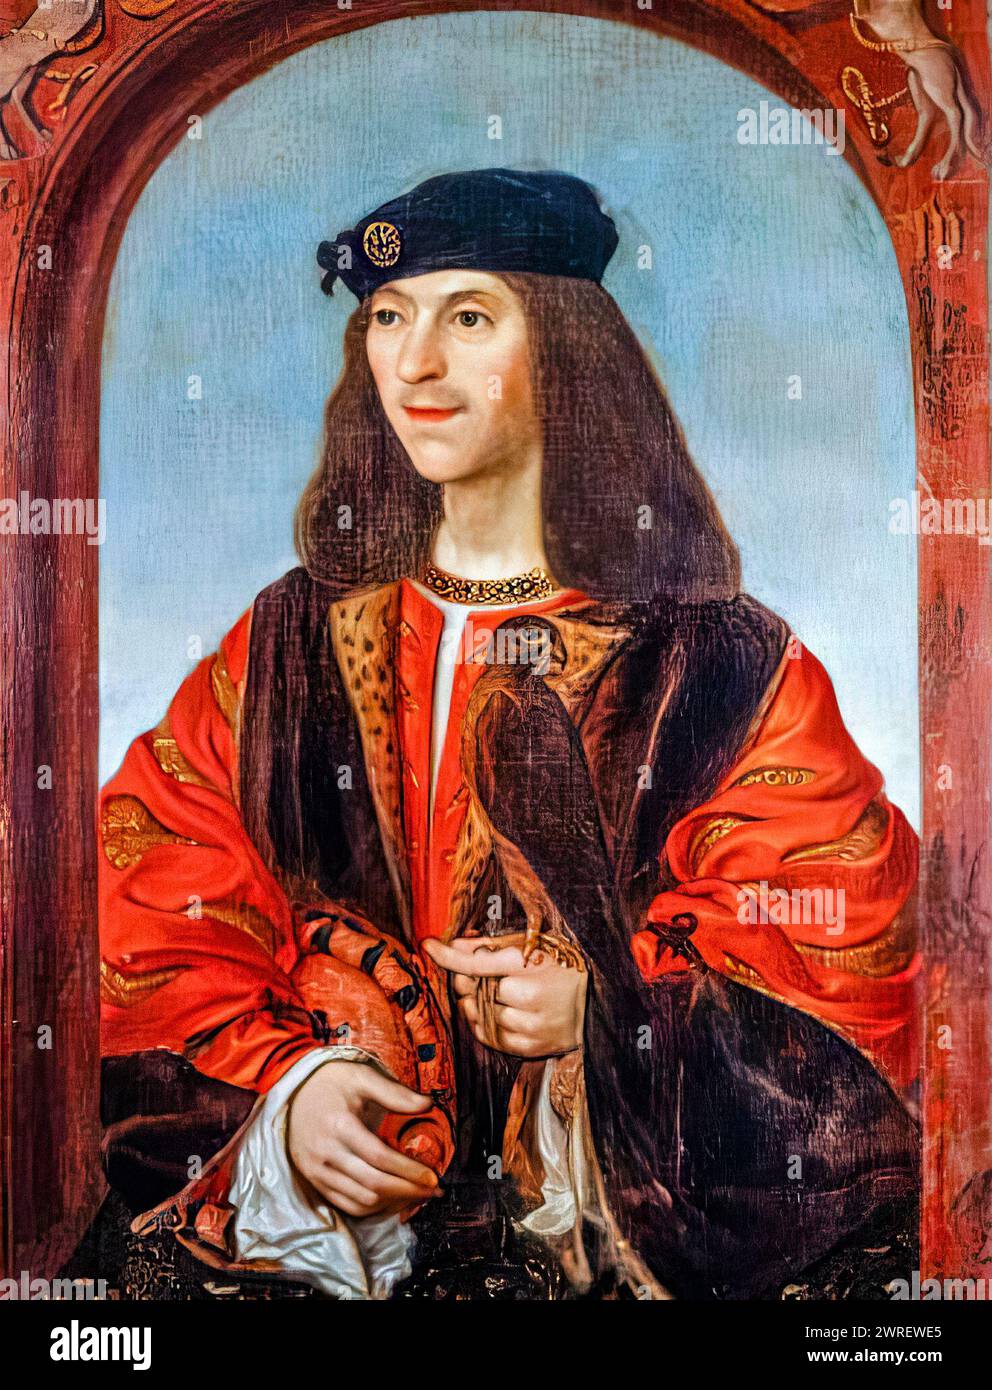 James IV of Scotland (1473-1513), King of Scotland 1488-1513, original portrait painting circa 1500, copy in oil by Daniel Mytens before 1647 Stock Photo